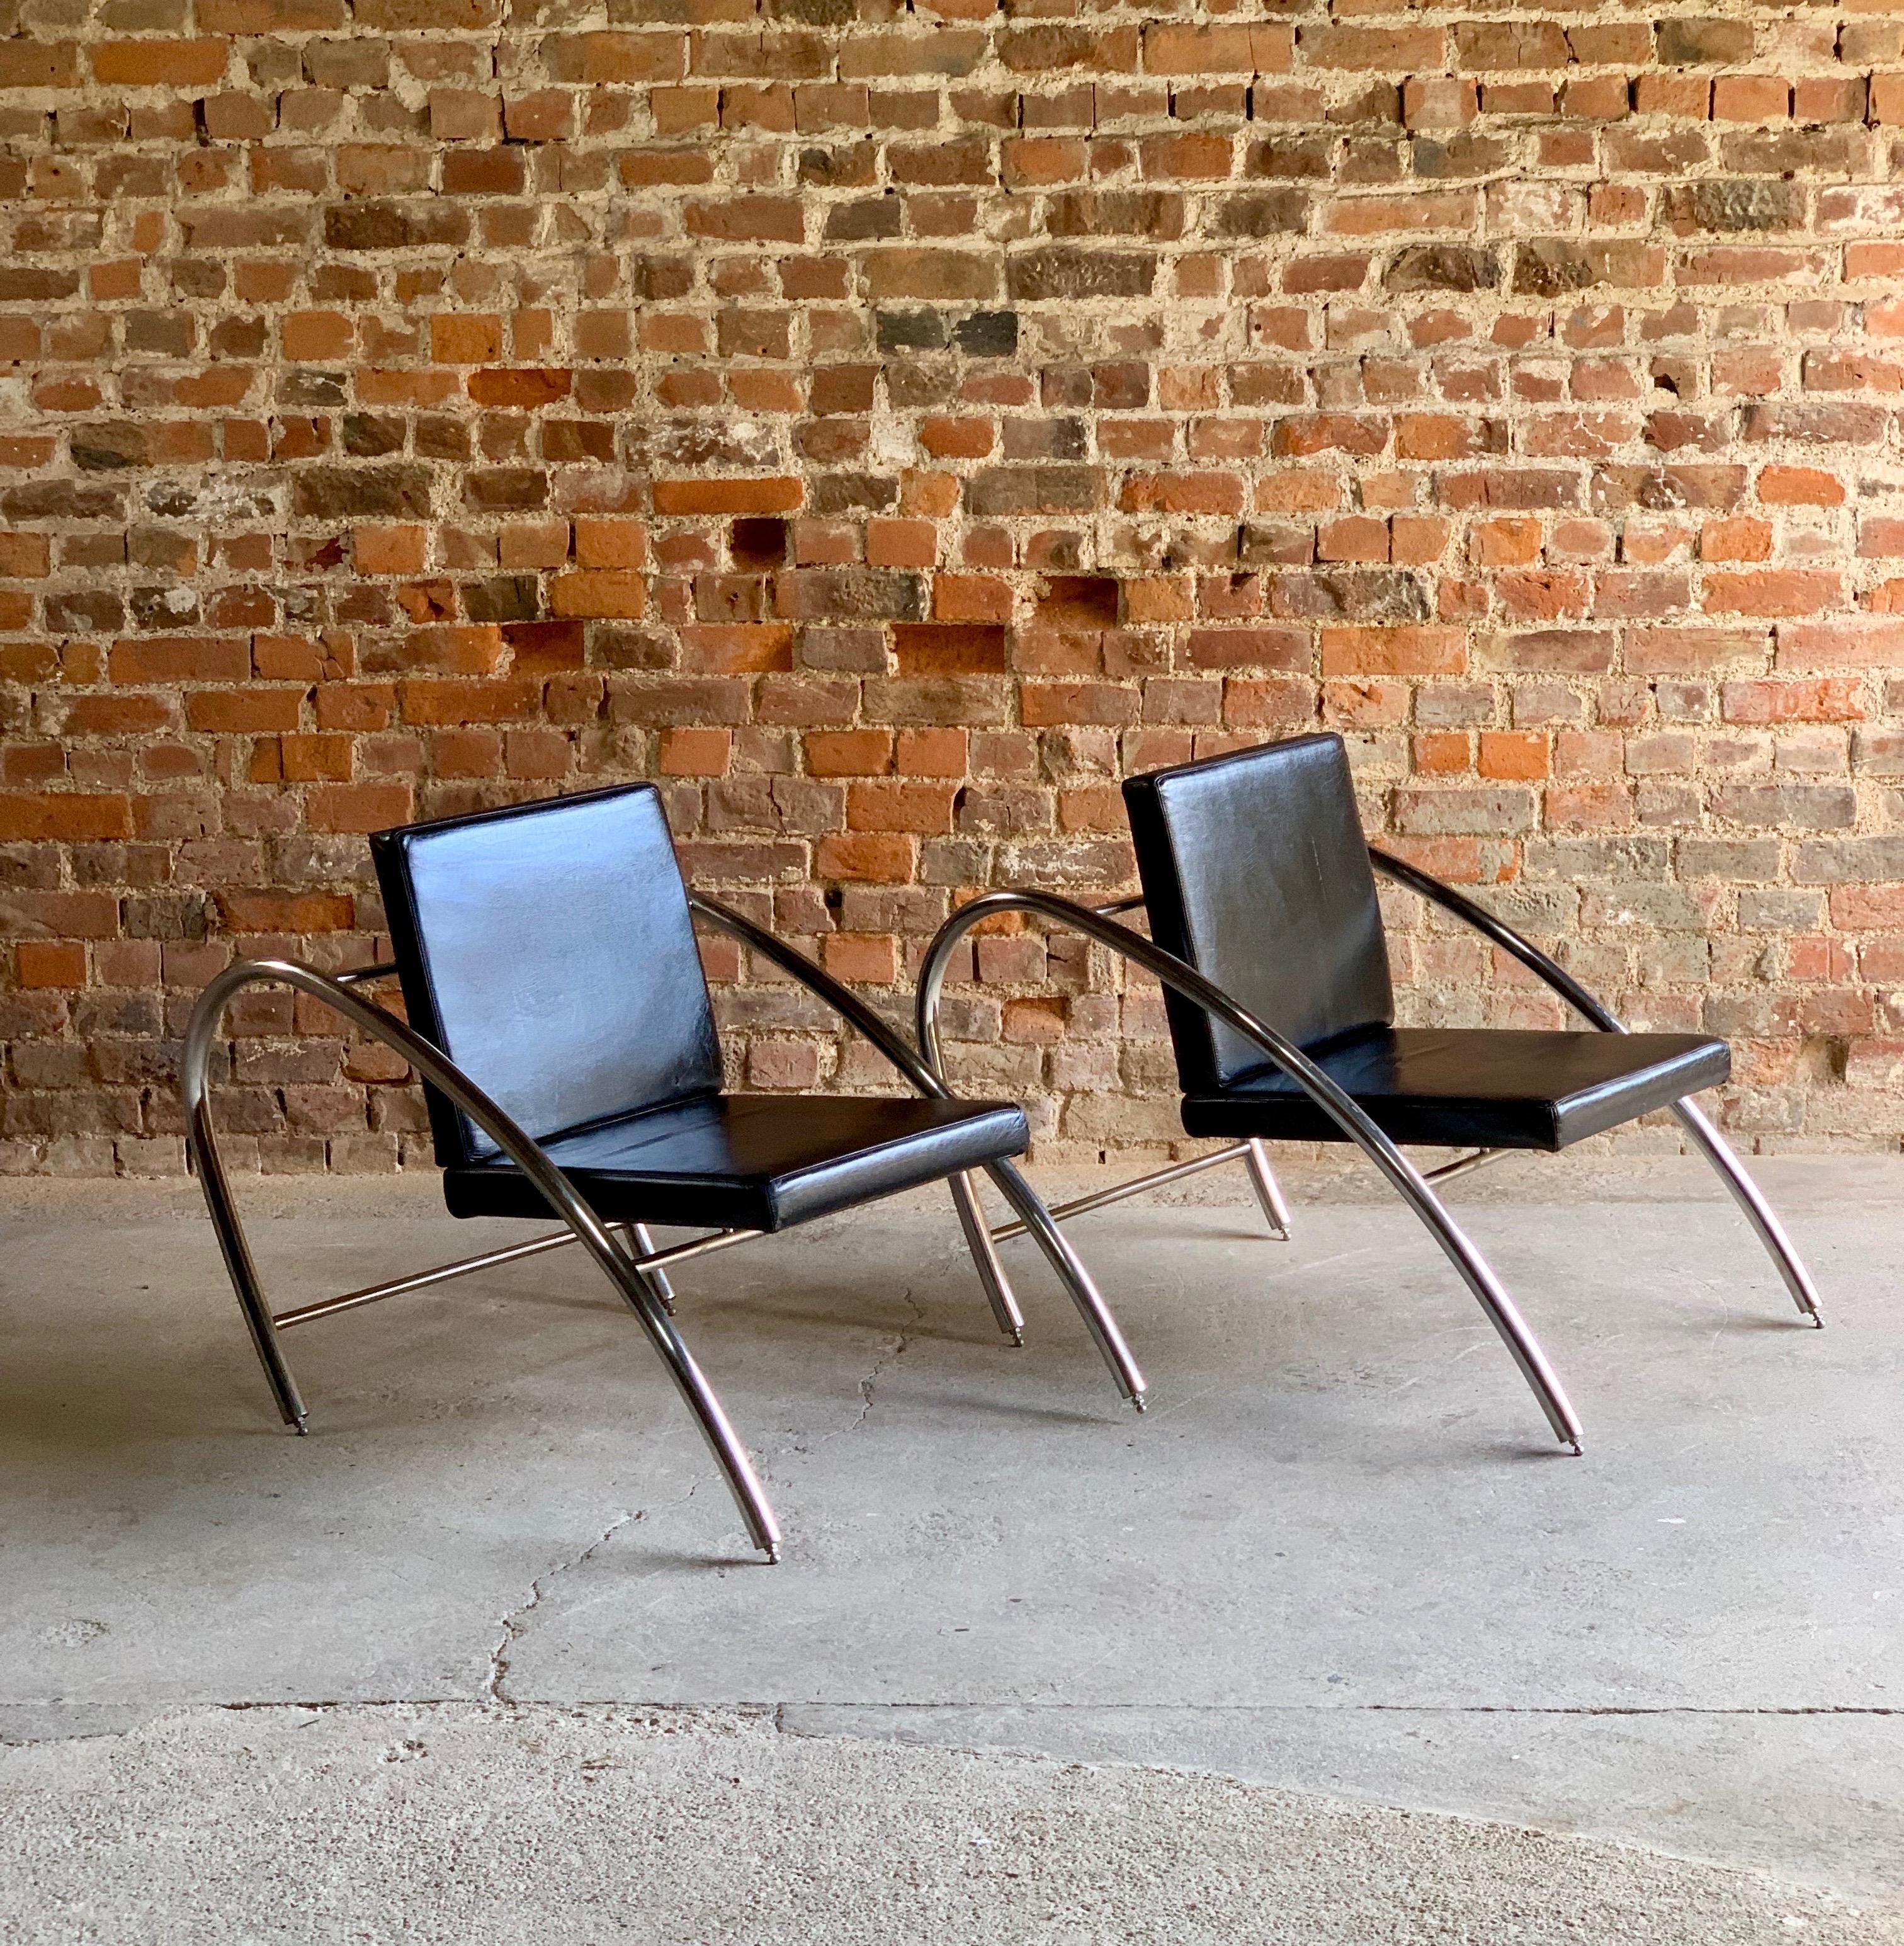 Moreno Chrome & Leather Lounge Chairs by Francois Scali & Alain Domingo for Nemo 2